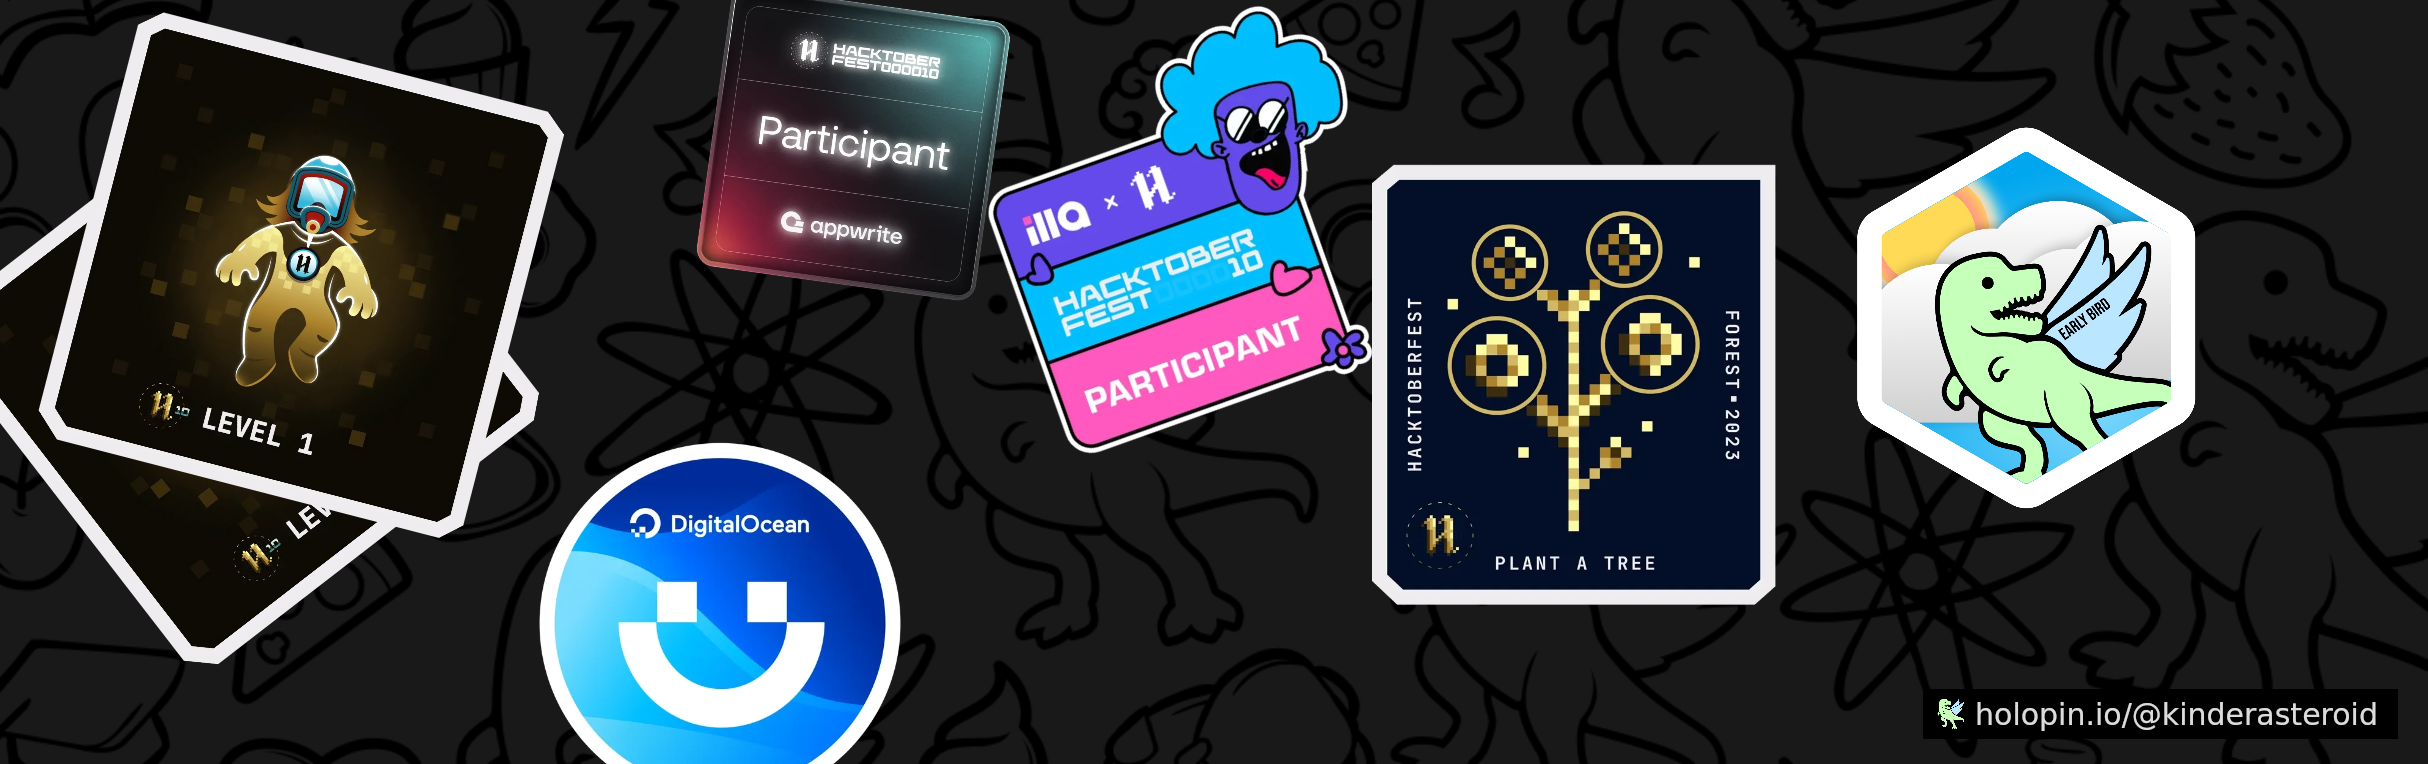 An image of @kinderasteroid's Holopin badges, which is a link to view their full Holopin profile